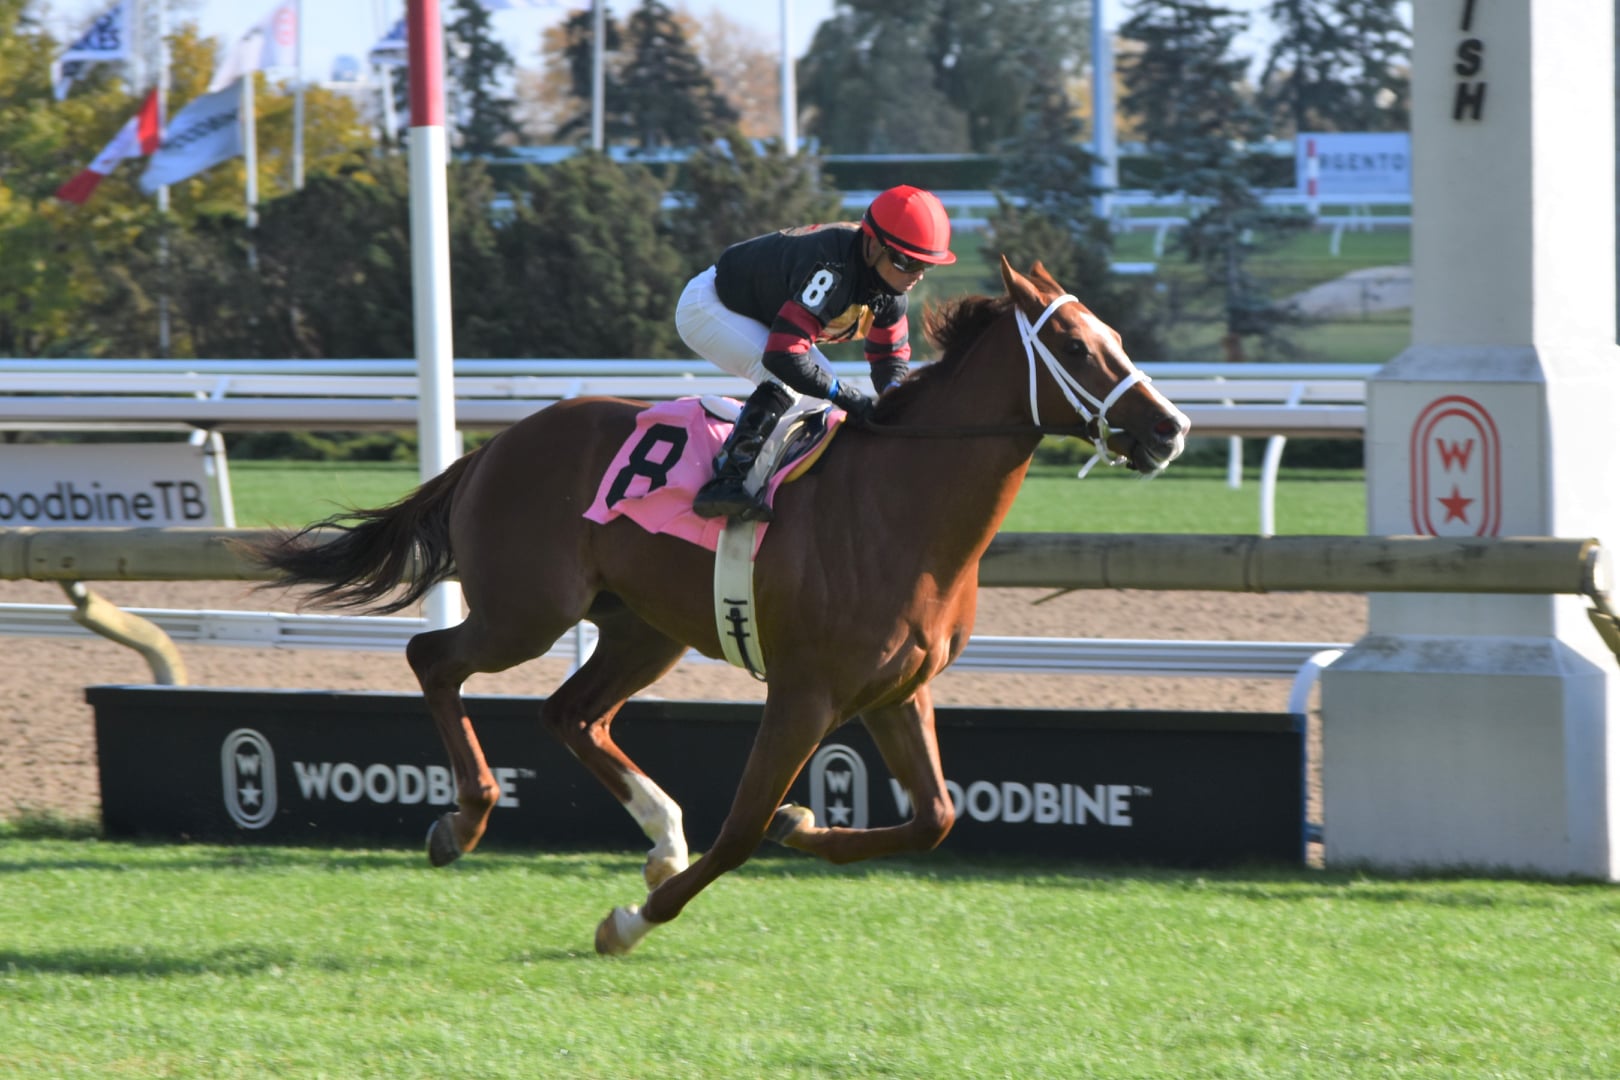 Ontario Racing in discussions regarding Thoroughbred equine benefit payments